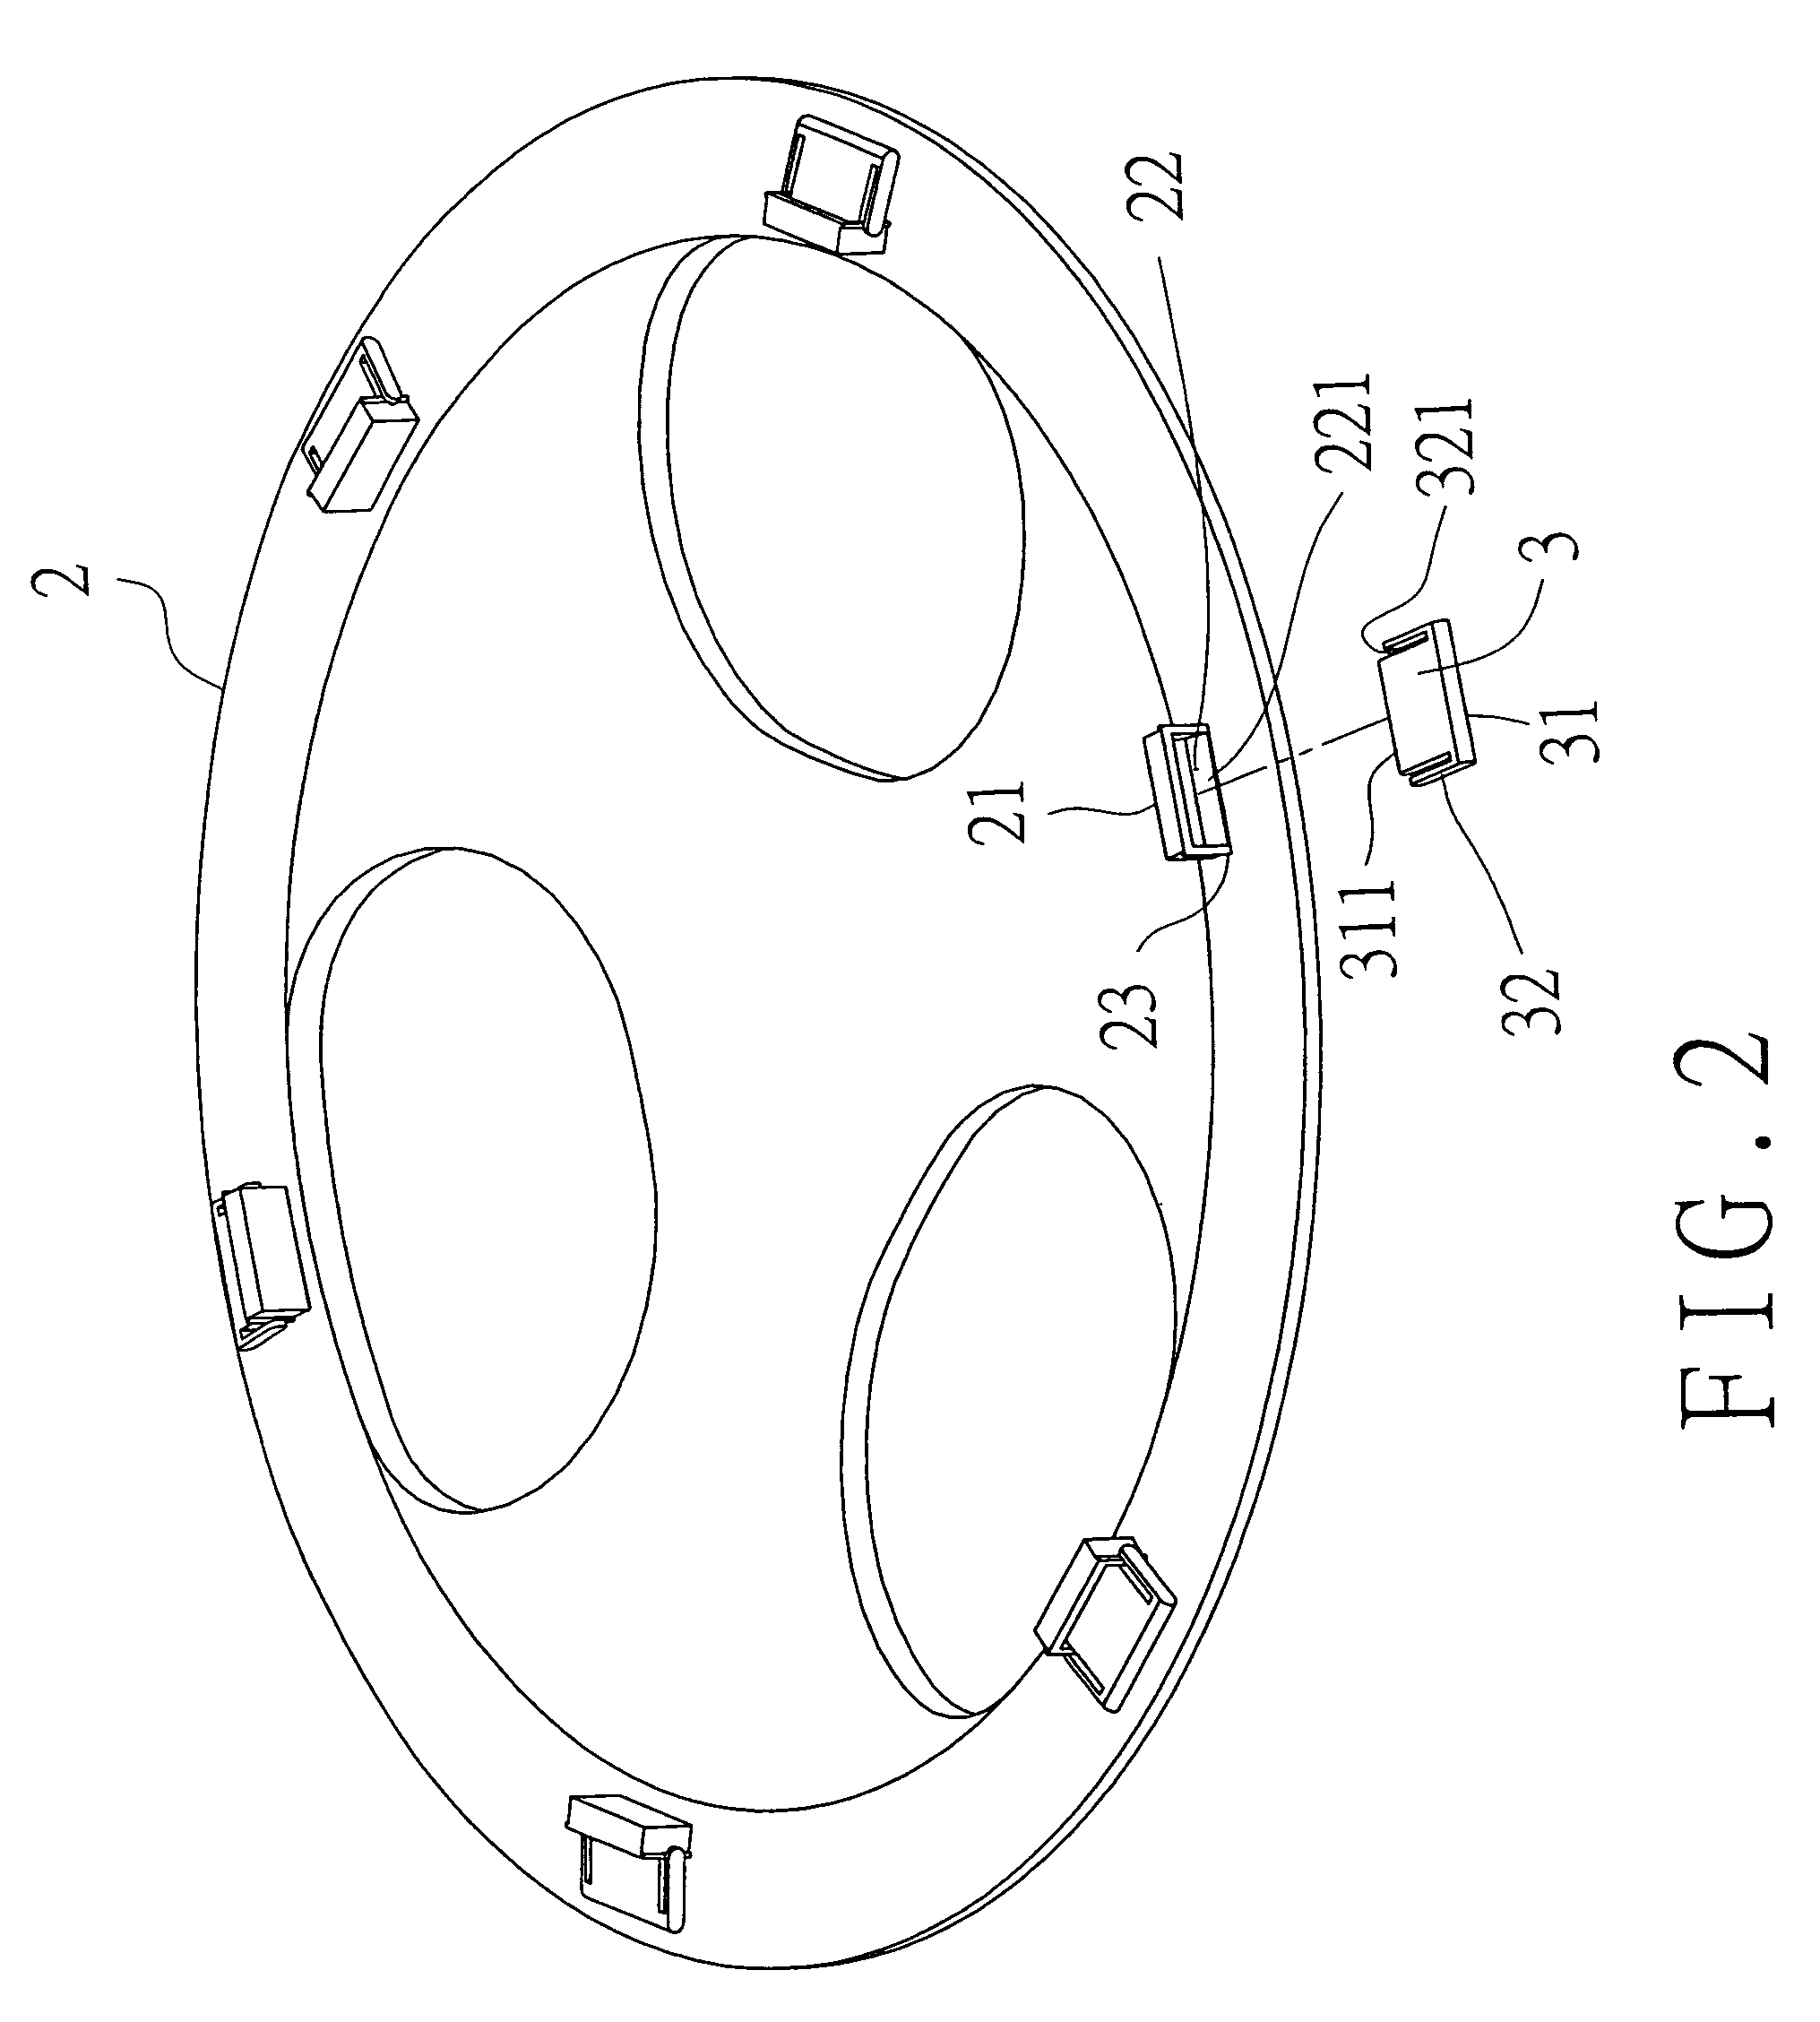 Interlocking method and its structure for wheel-rim cover